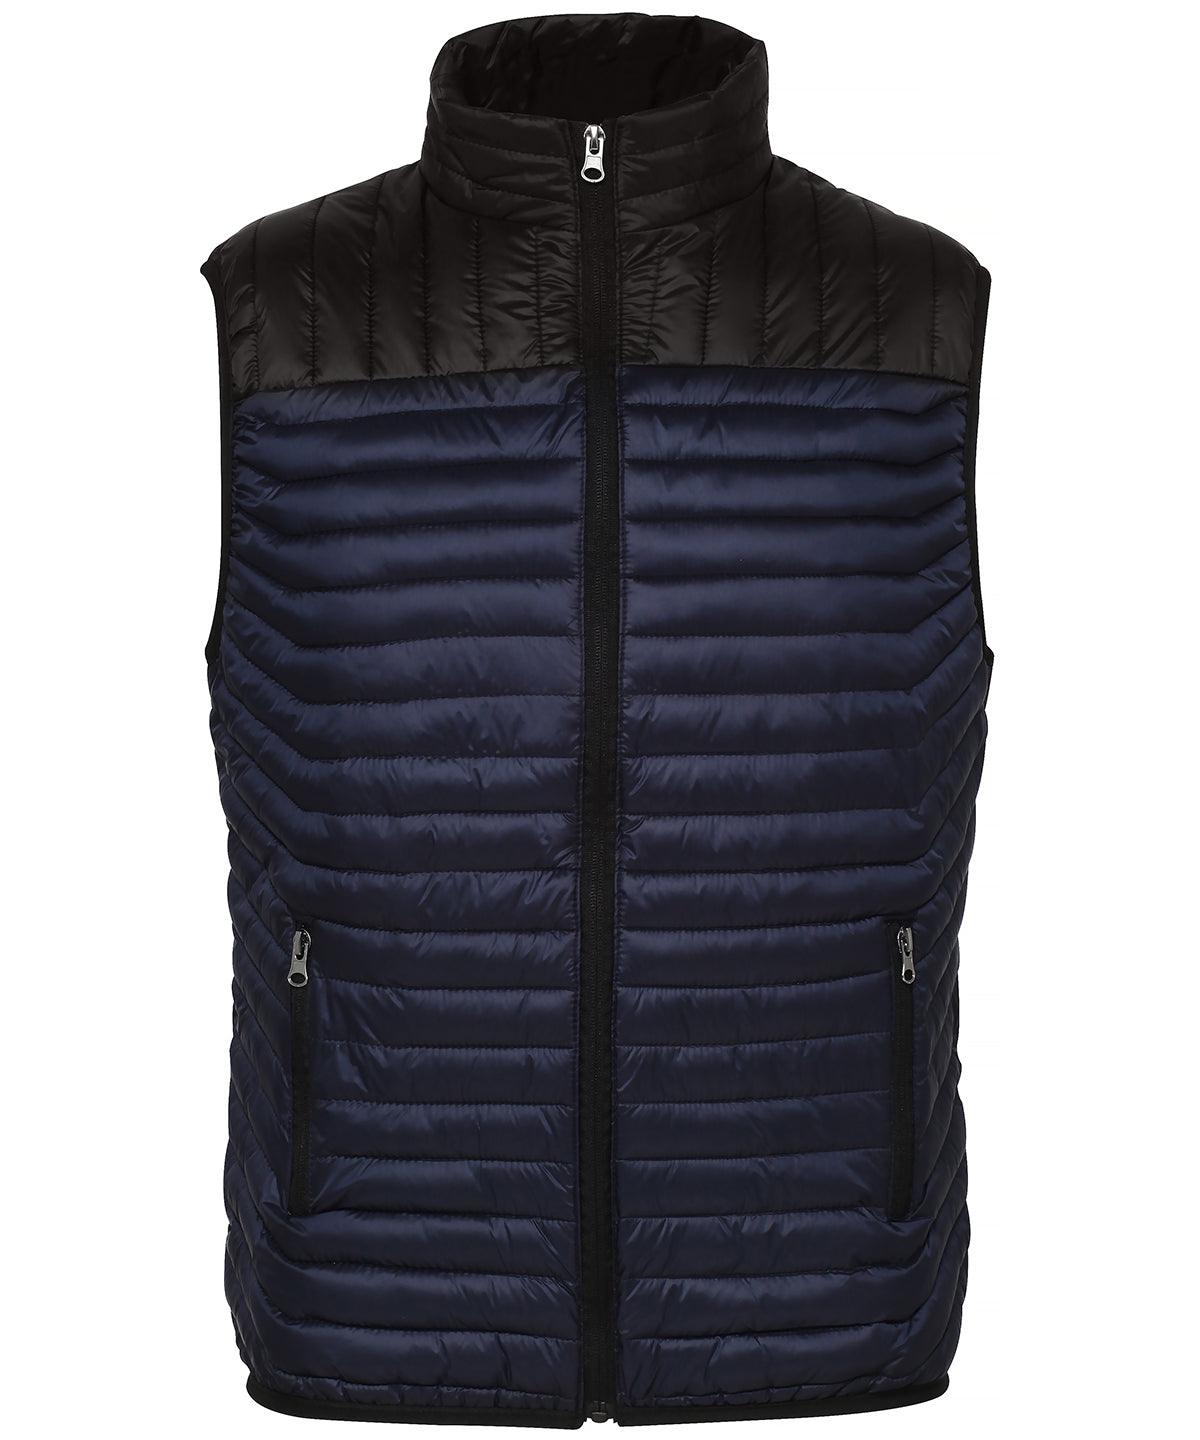 Navy/Black - Domain two-tone gilet Body Warmers 2786 Alfresco Dining, Gilets and Bodywarmers, Jackets & Coats, Outdoor Dining, Padded & Insulation, Raladeal - Recently Added Schoolwear Centres